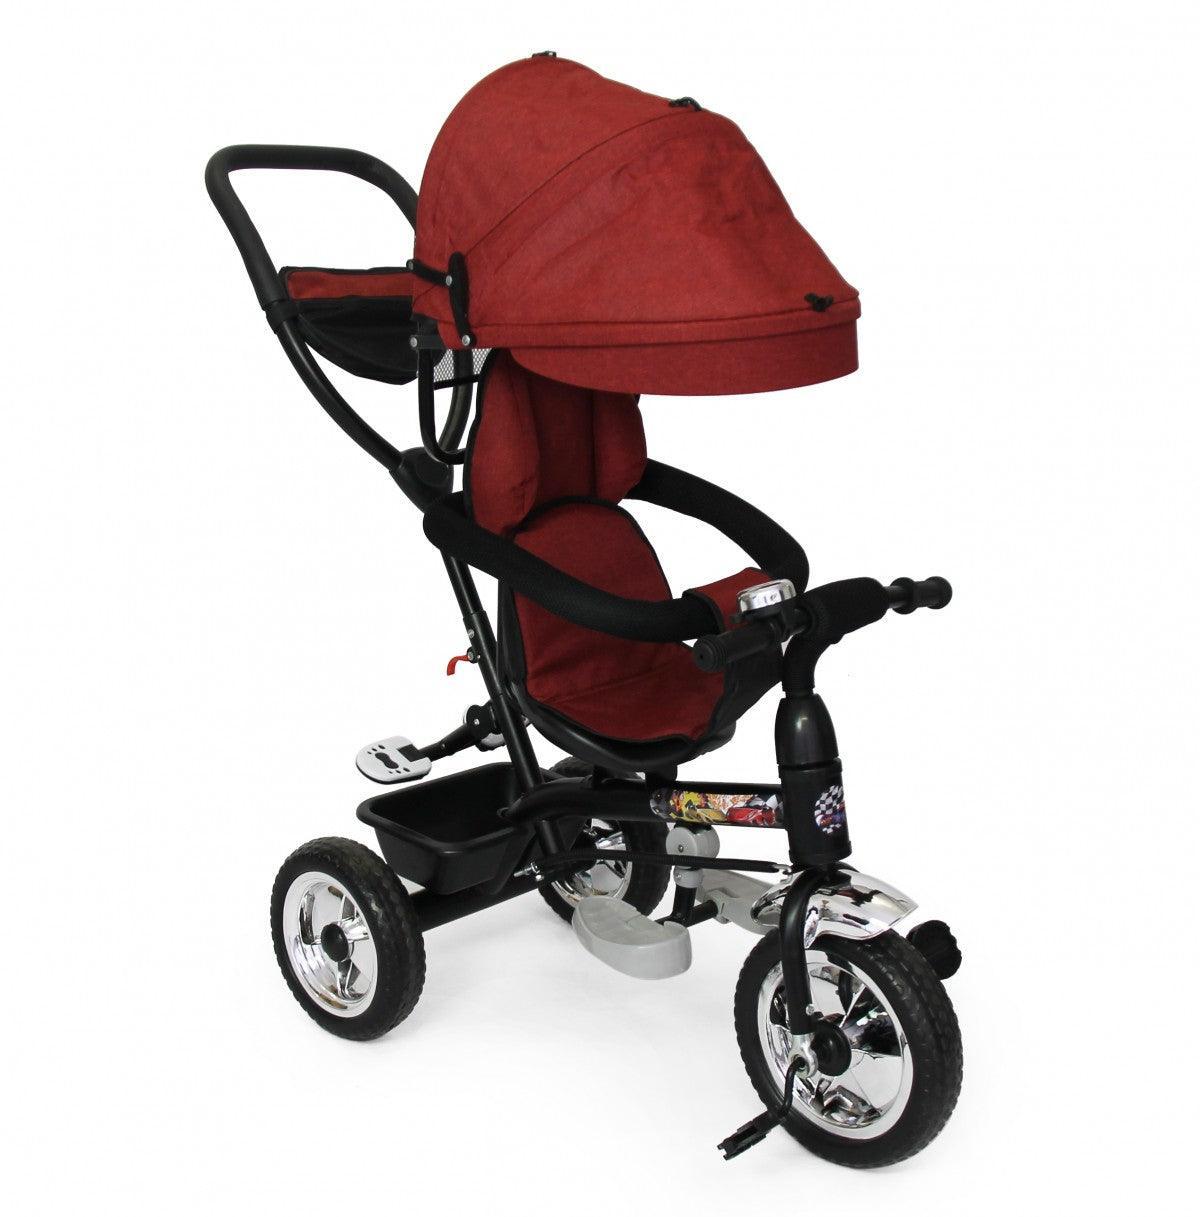 "Experience the Joy of Riding with the Stages Stroller Tricycle - Red" - 4aKid